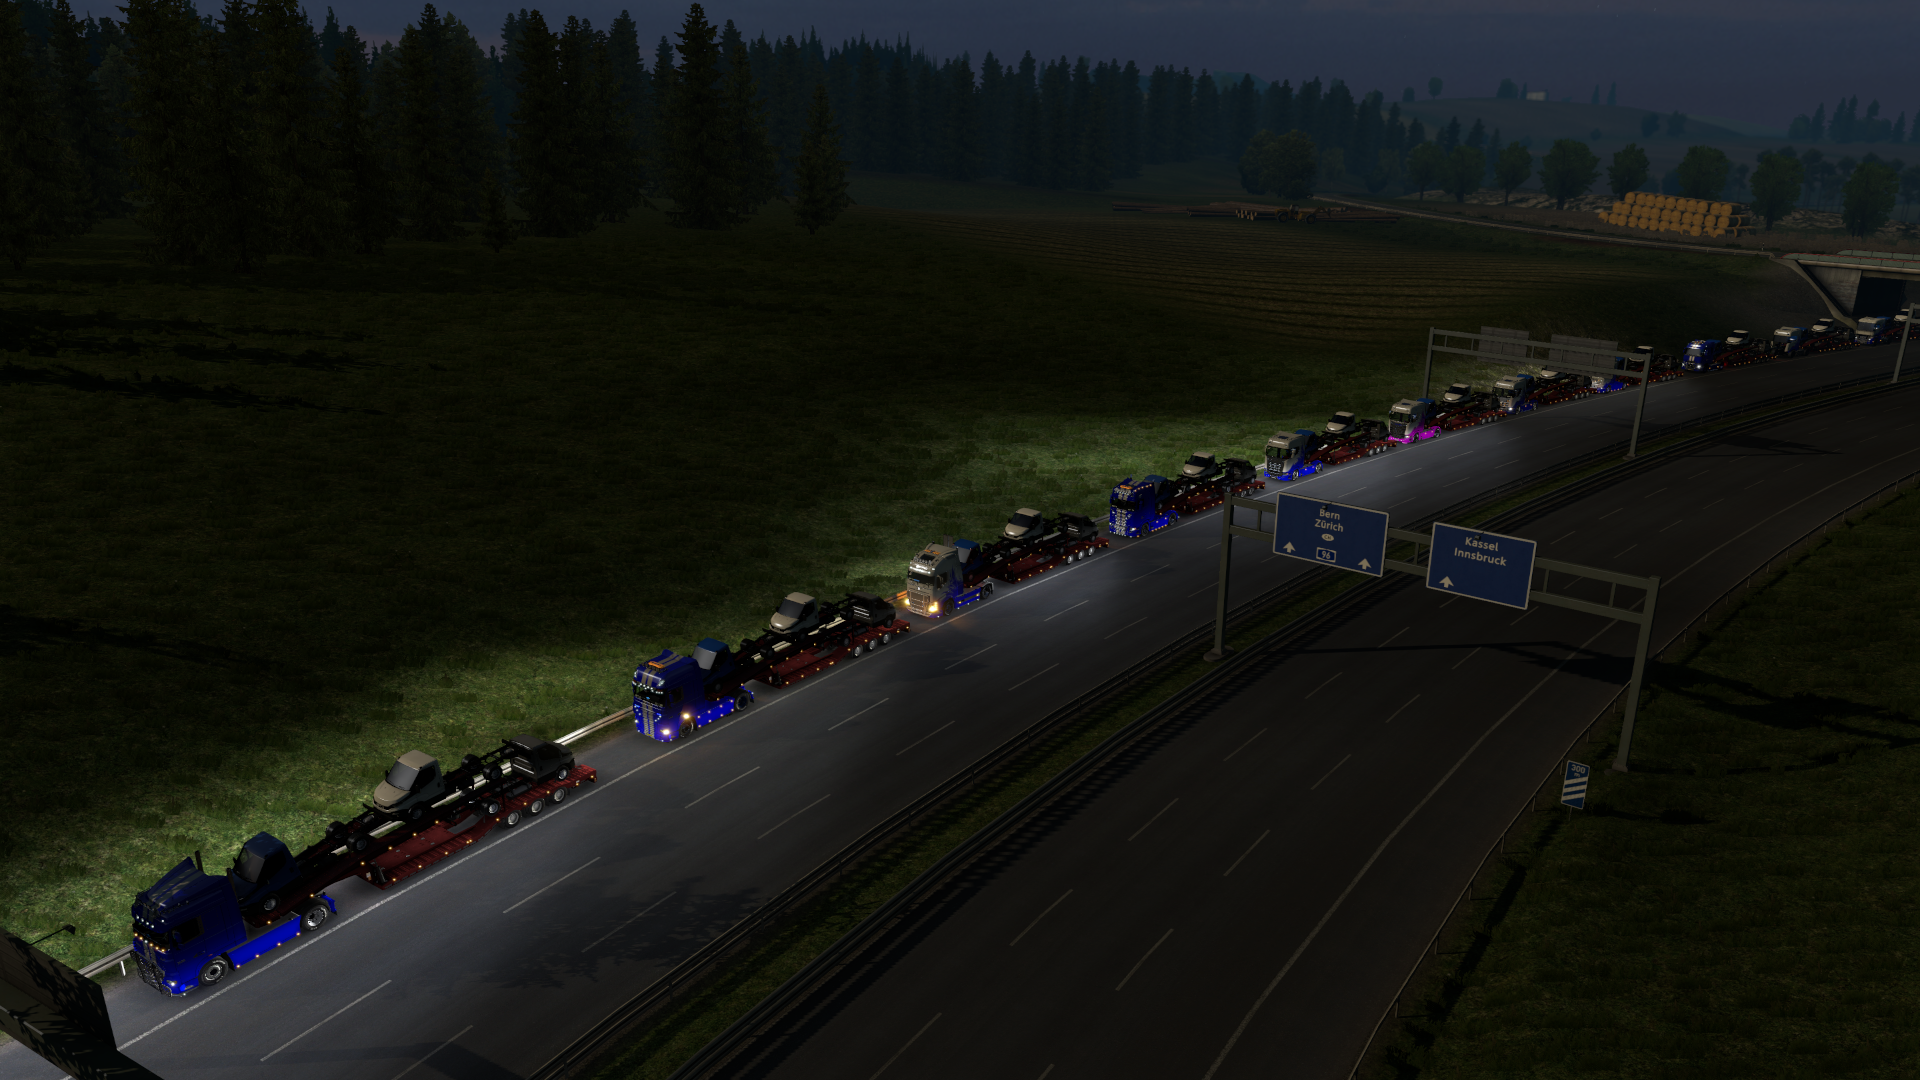 ets2_20210409_225131_00.png